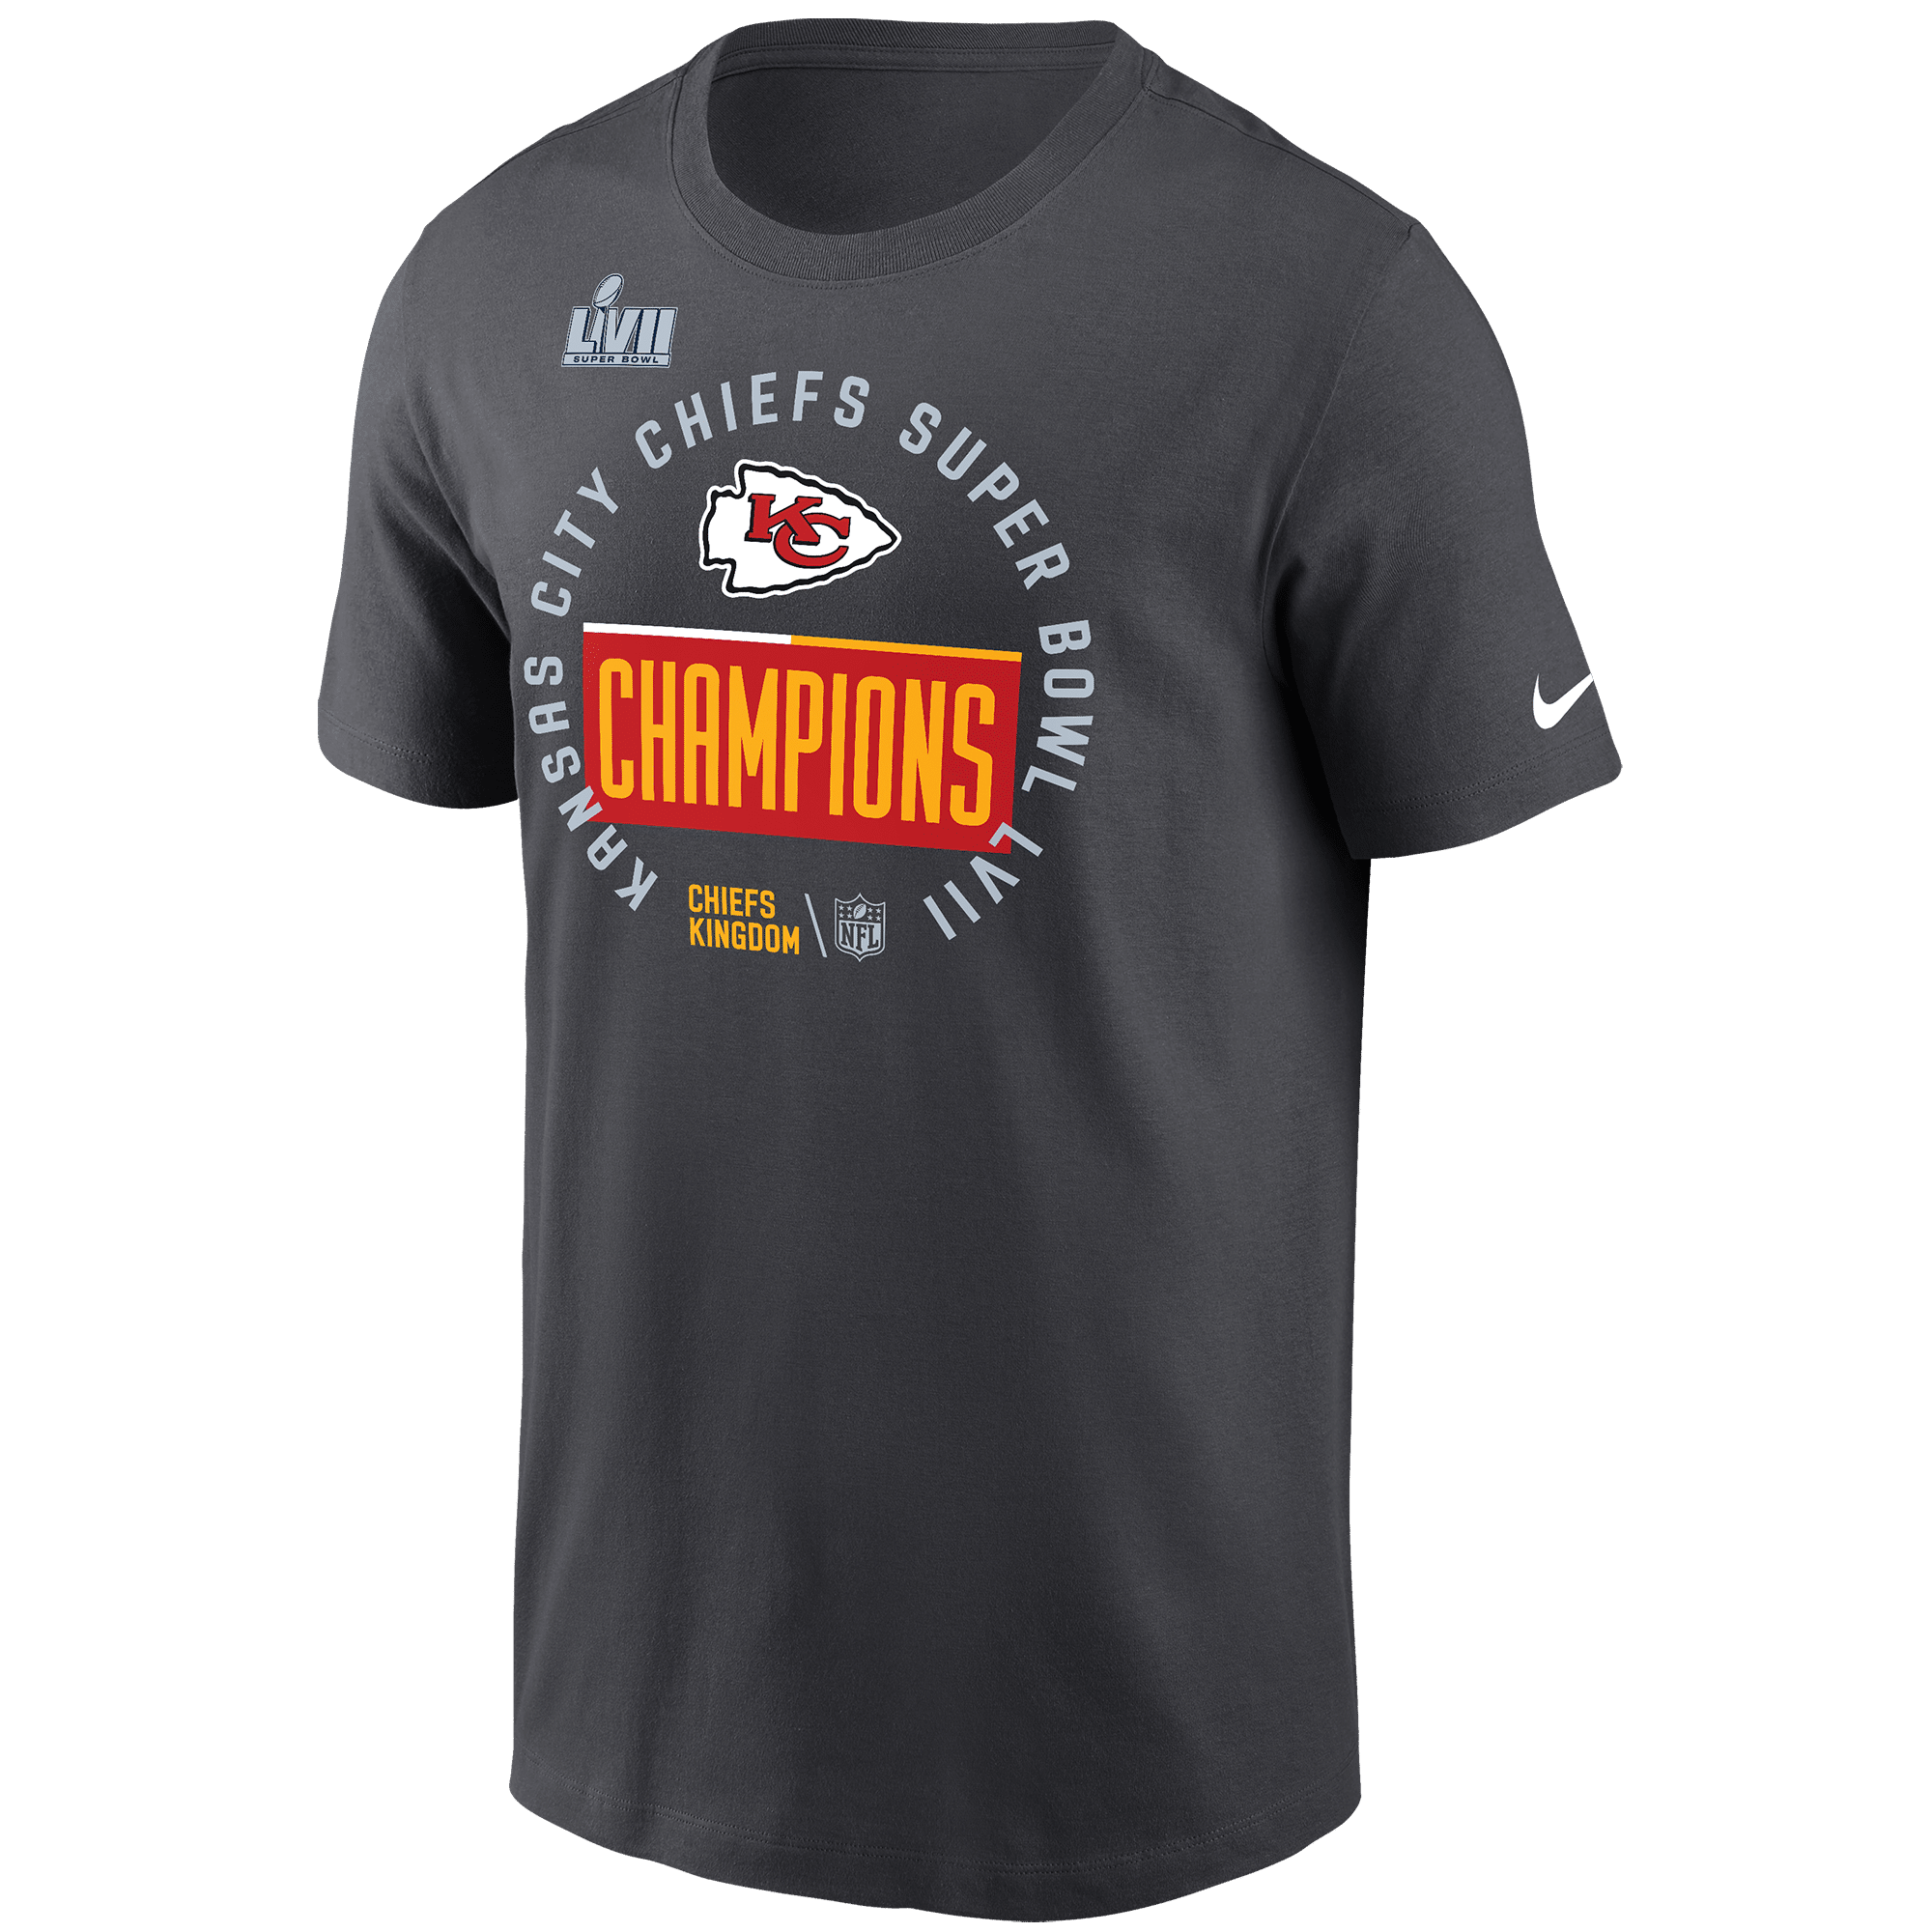 Where to buy Chiefs Super Bowl 57 championship gear